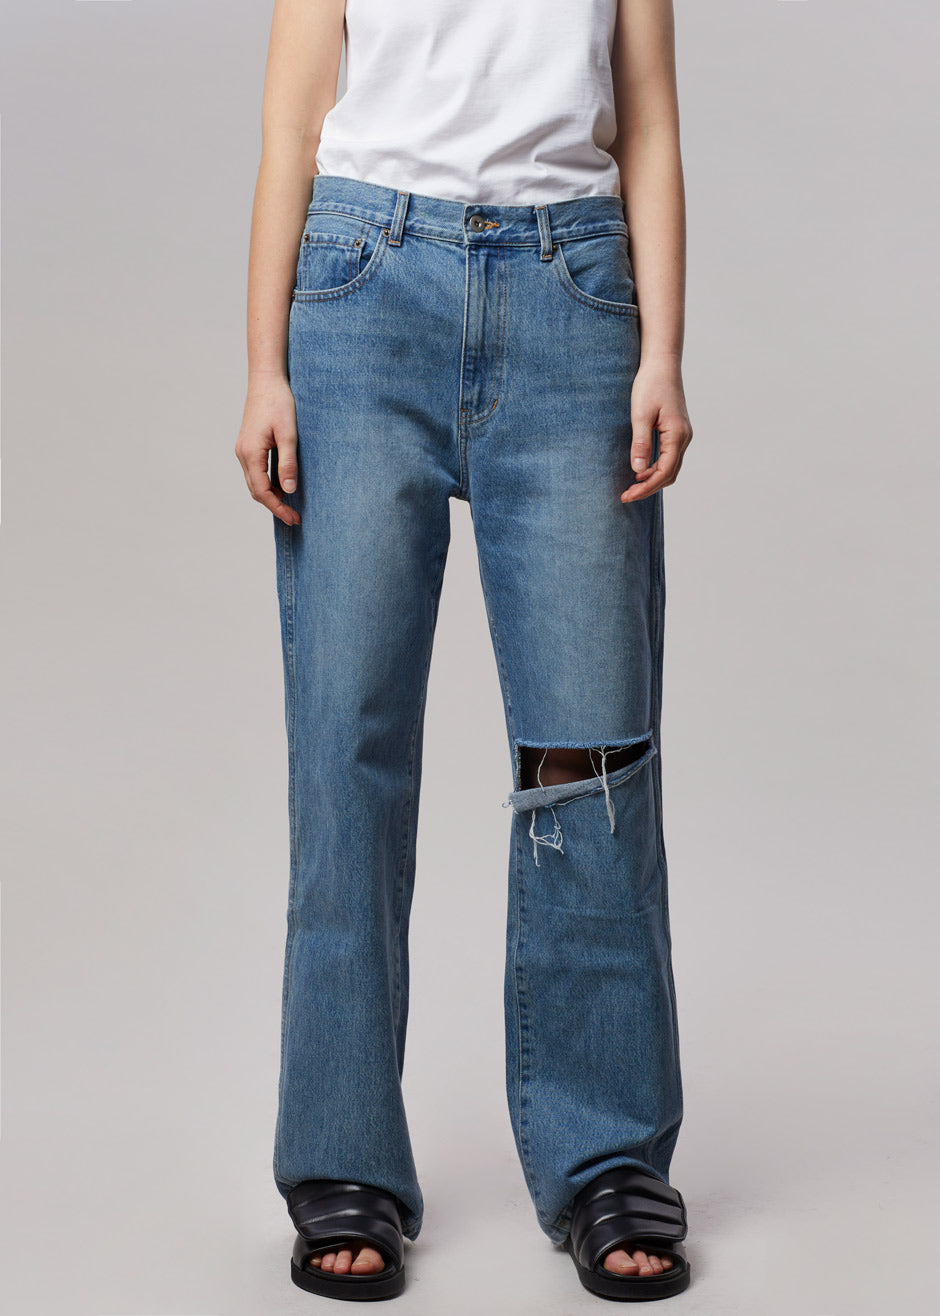 Laon Ripped Jeans - Worn Wash - 7